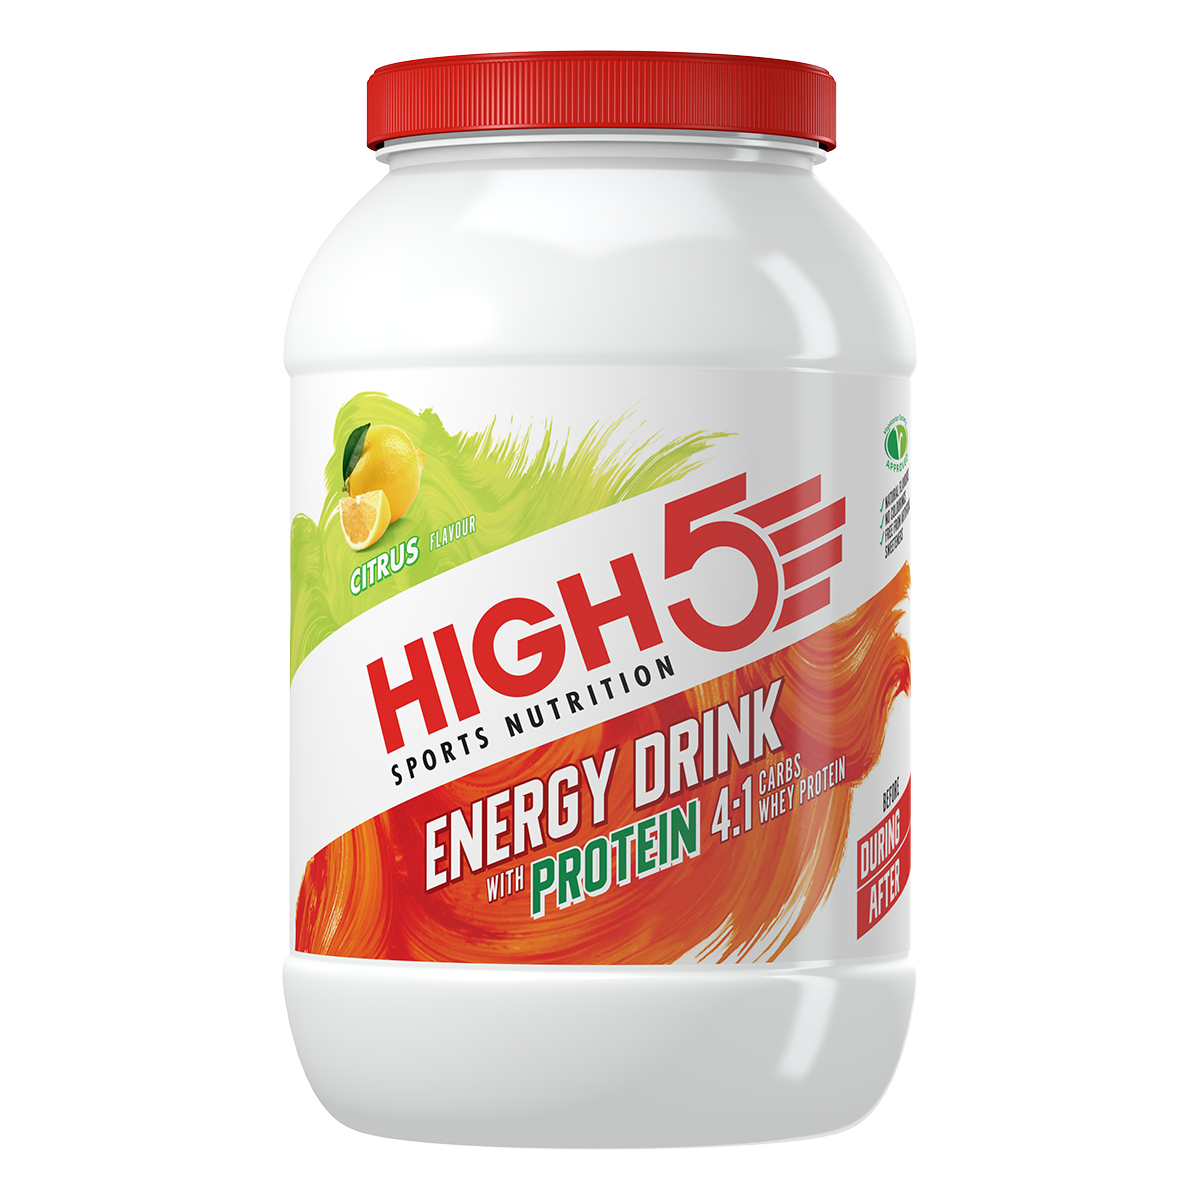 Energy-Drink-With-Protein_Citrus_1600g_Front_RGB_1200x1200.png